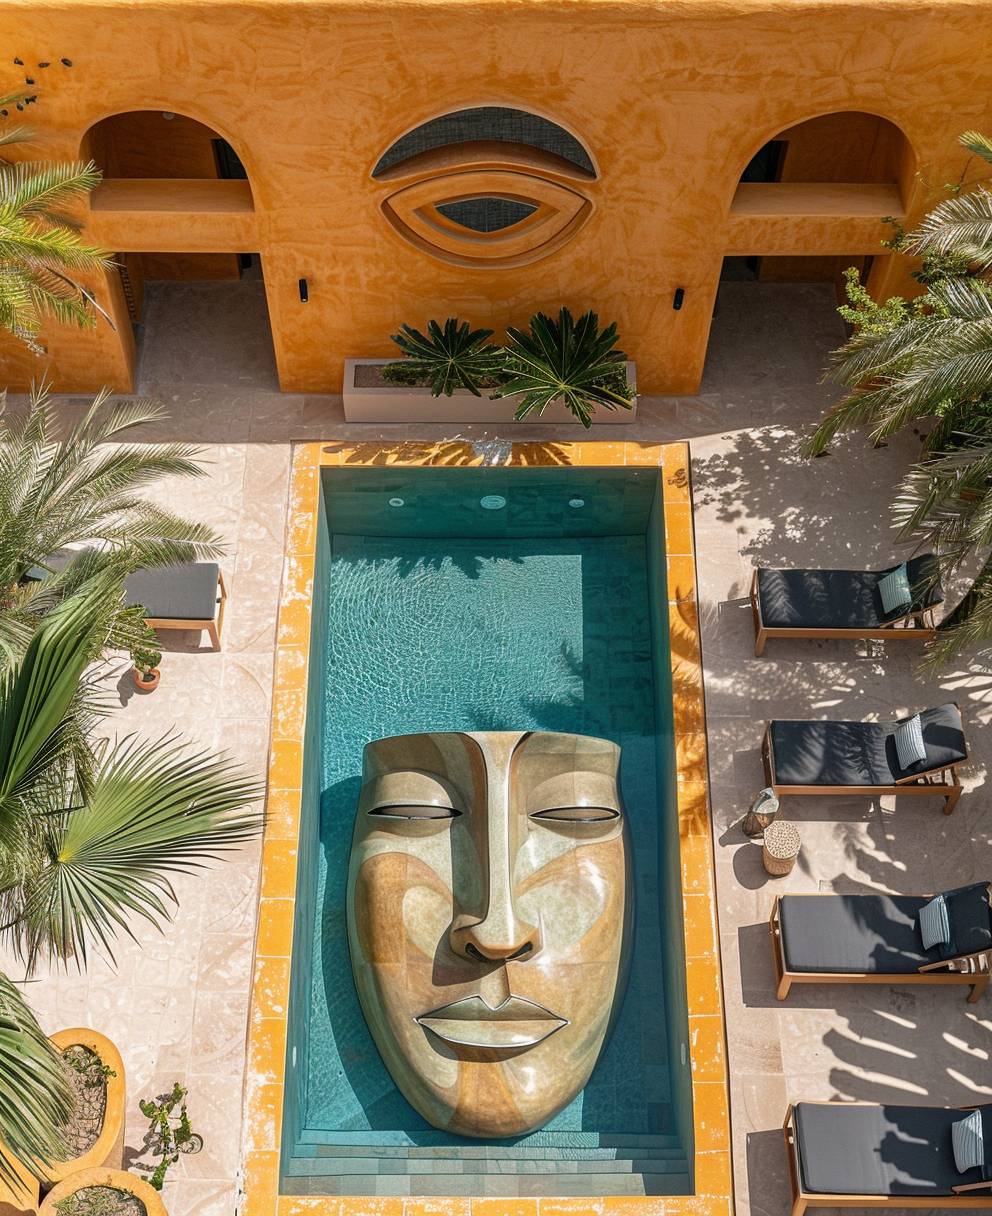 Aerial view of swimming pool with face motif in the style of Picasso and Matisse, pastel colors, minimalist design